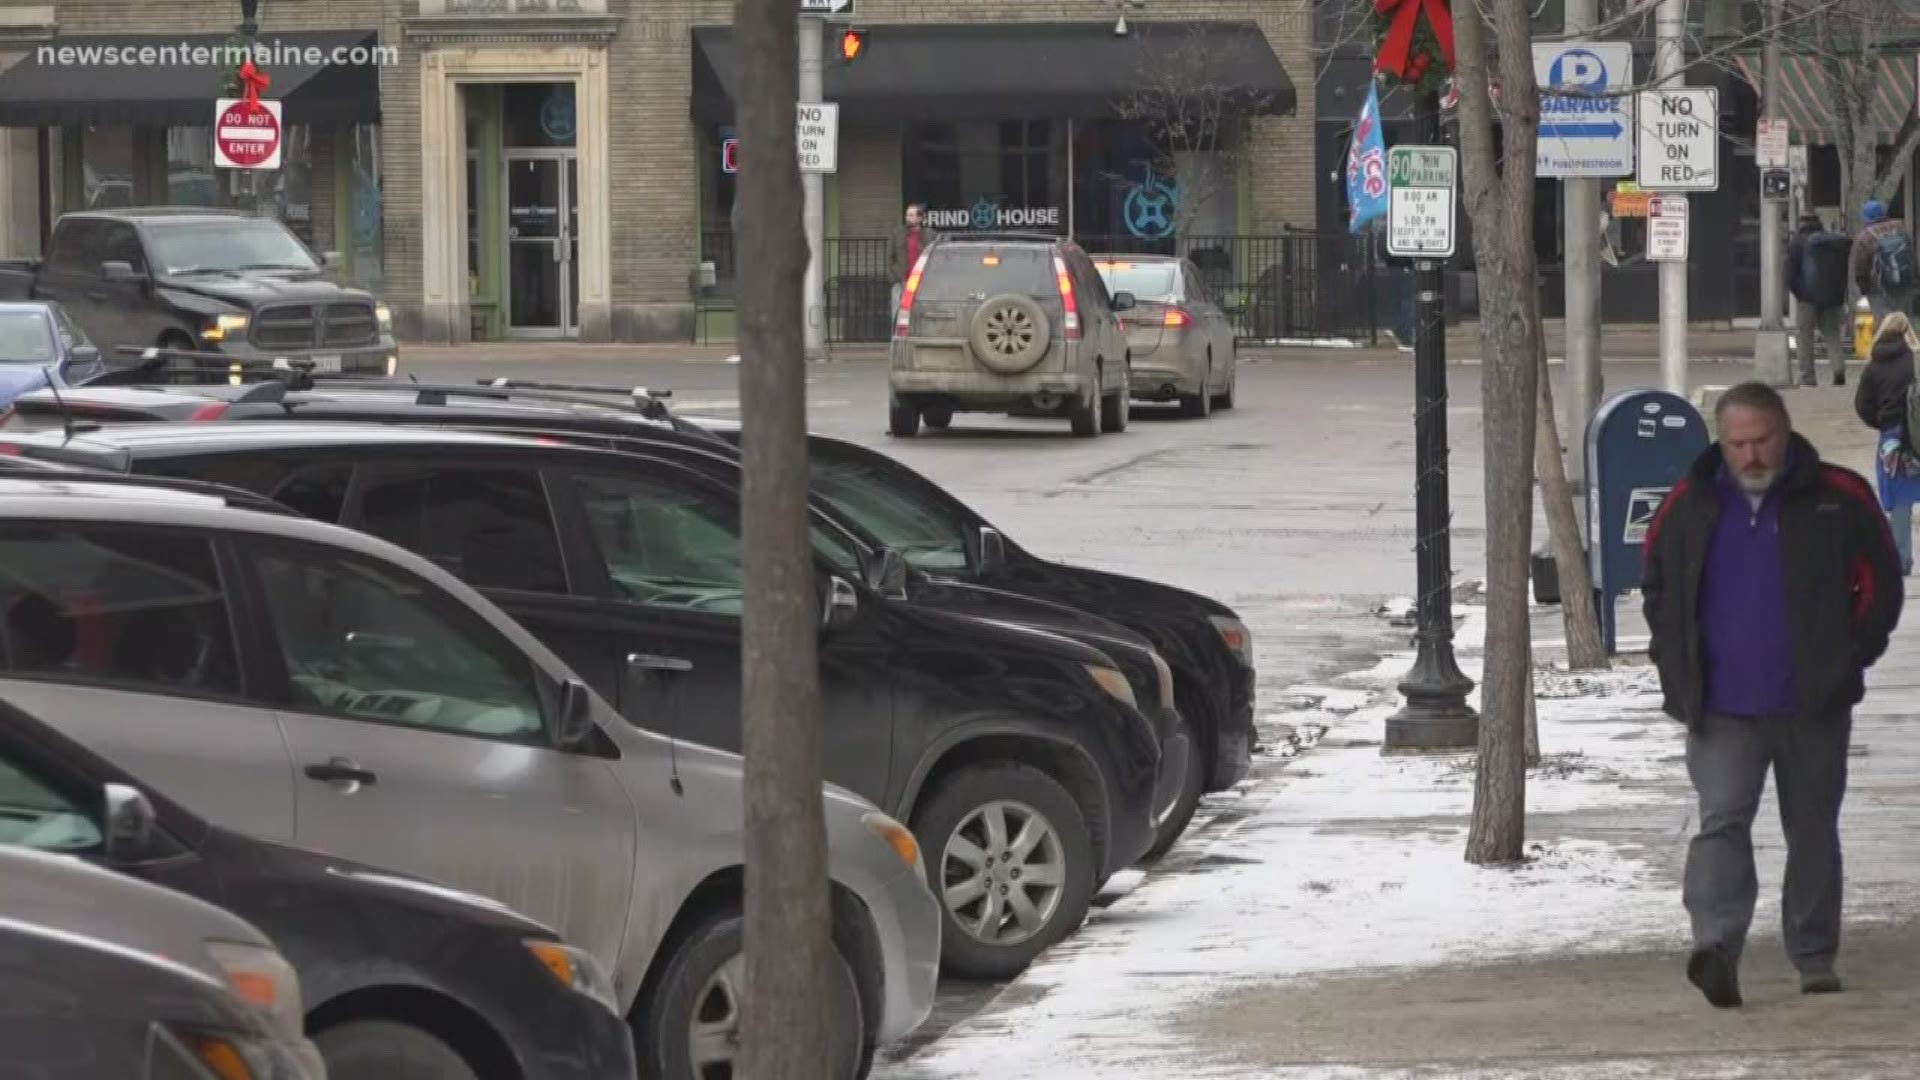 The downtown parking shuffle during parking bans